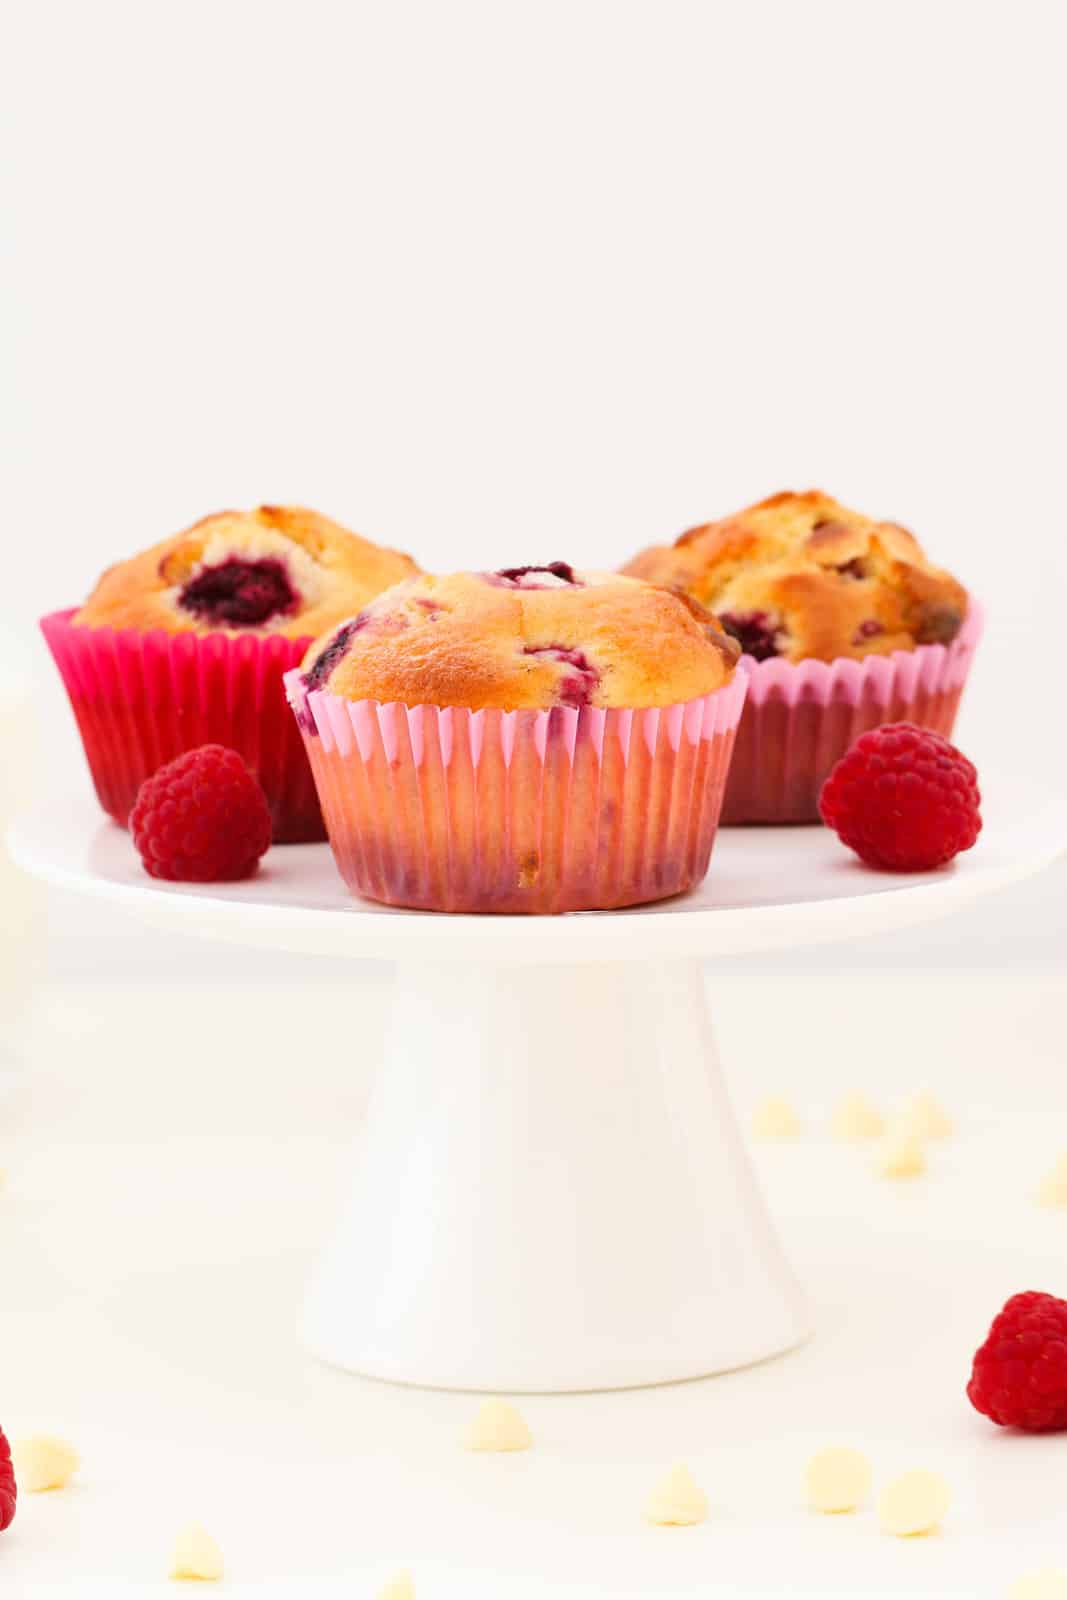 Muffins in pink and red paper cases and two fresh raspberries on a white cake stand.